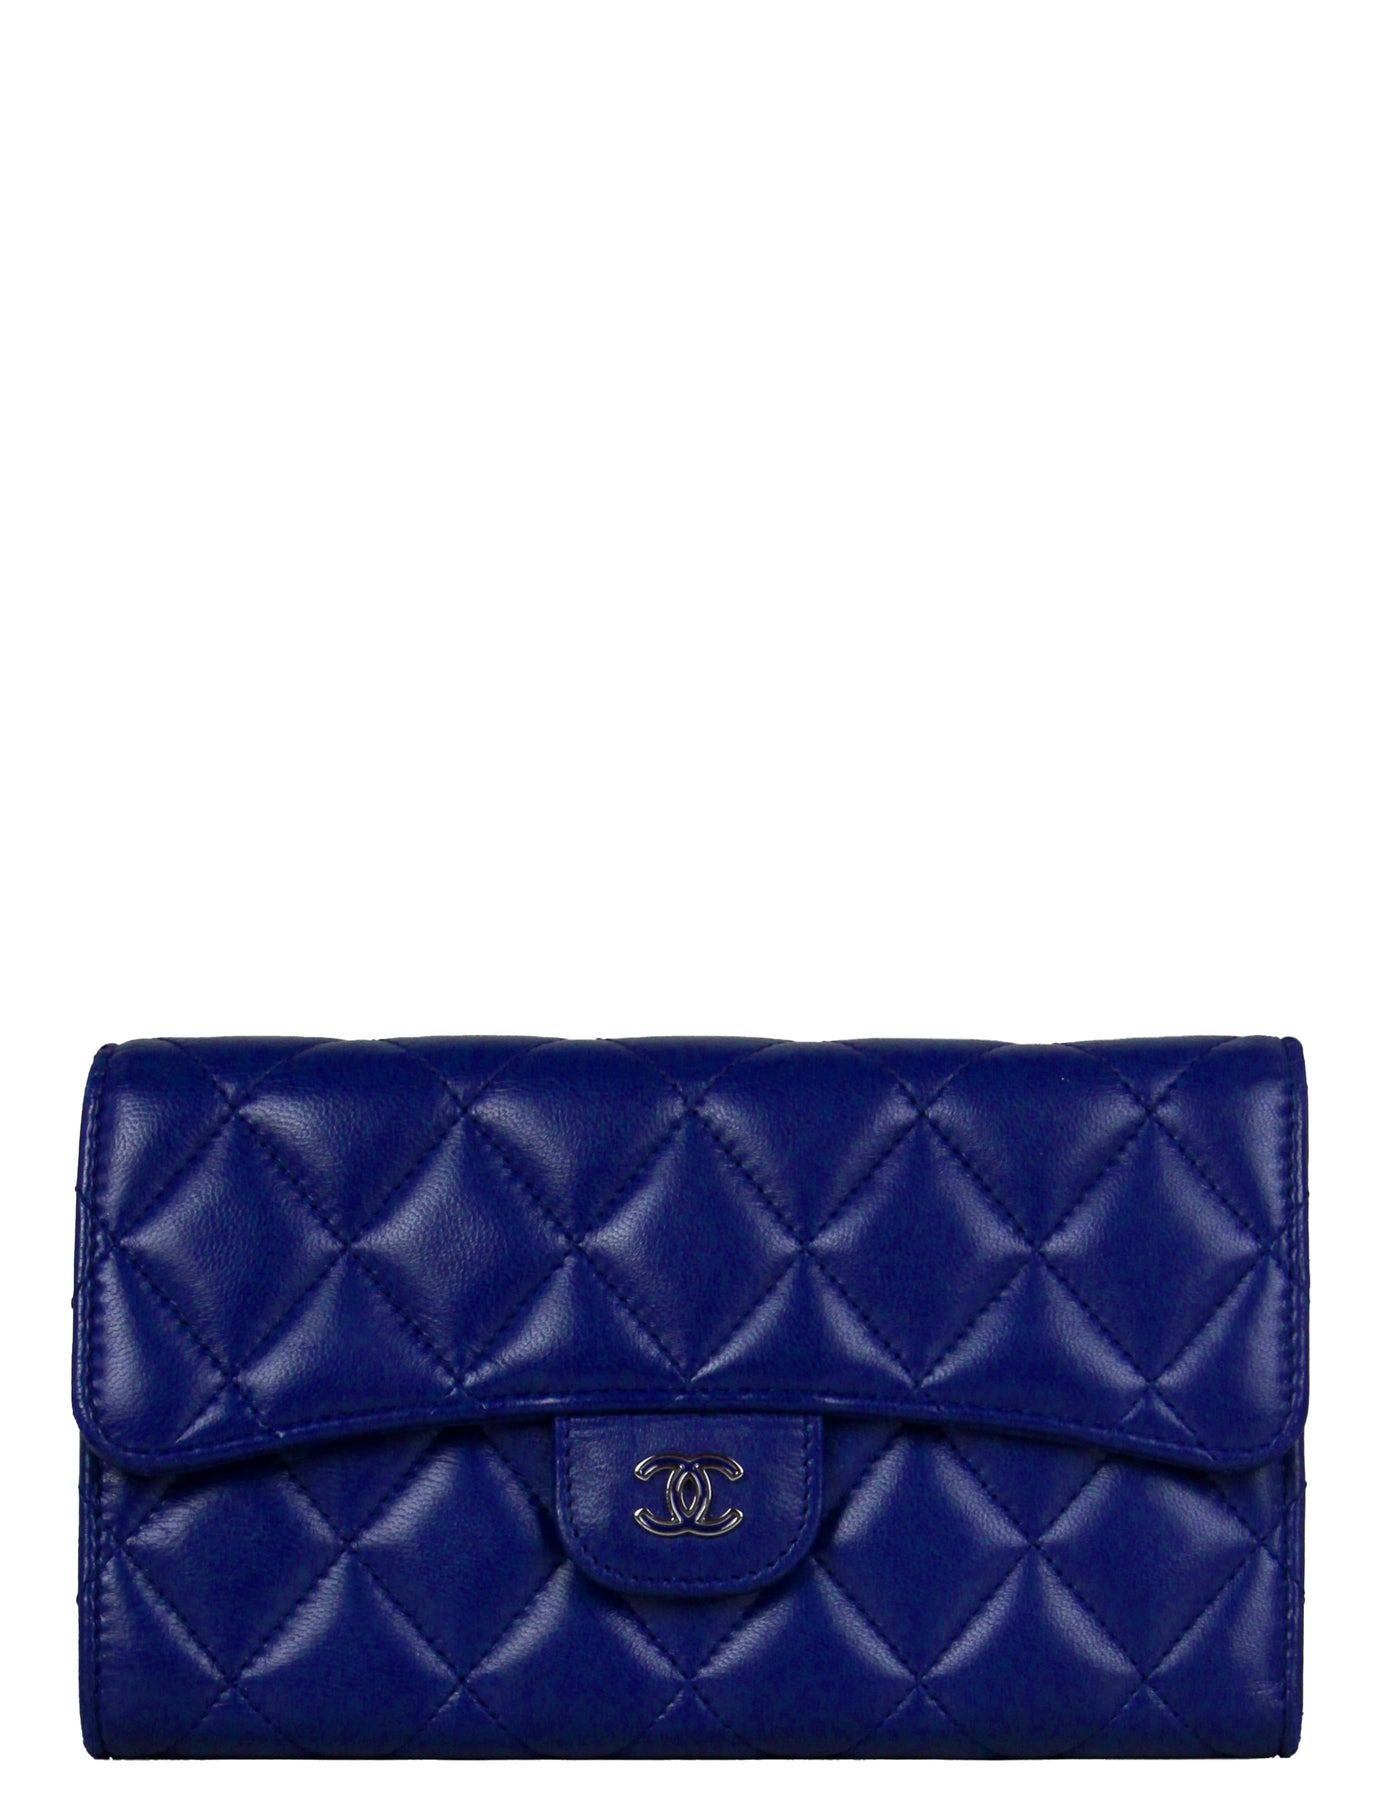 Chanel Blue Lambskin Quilted Large Gusset Flap Wallet